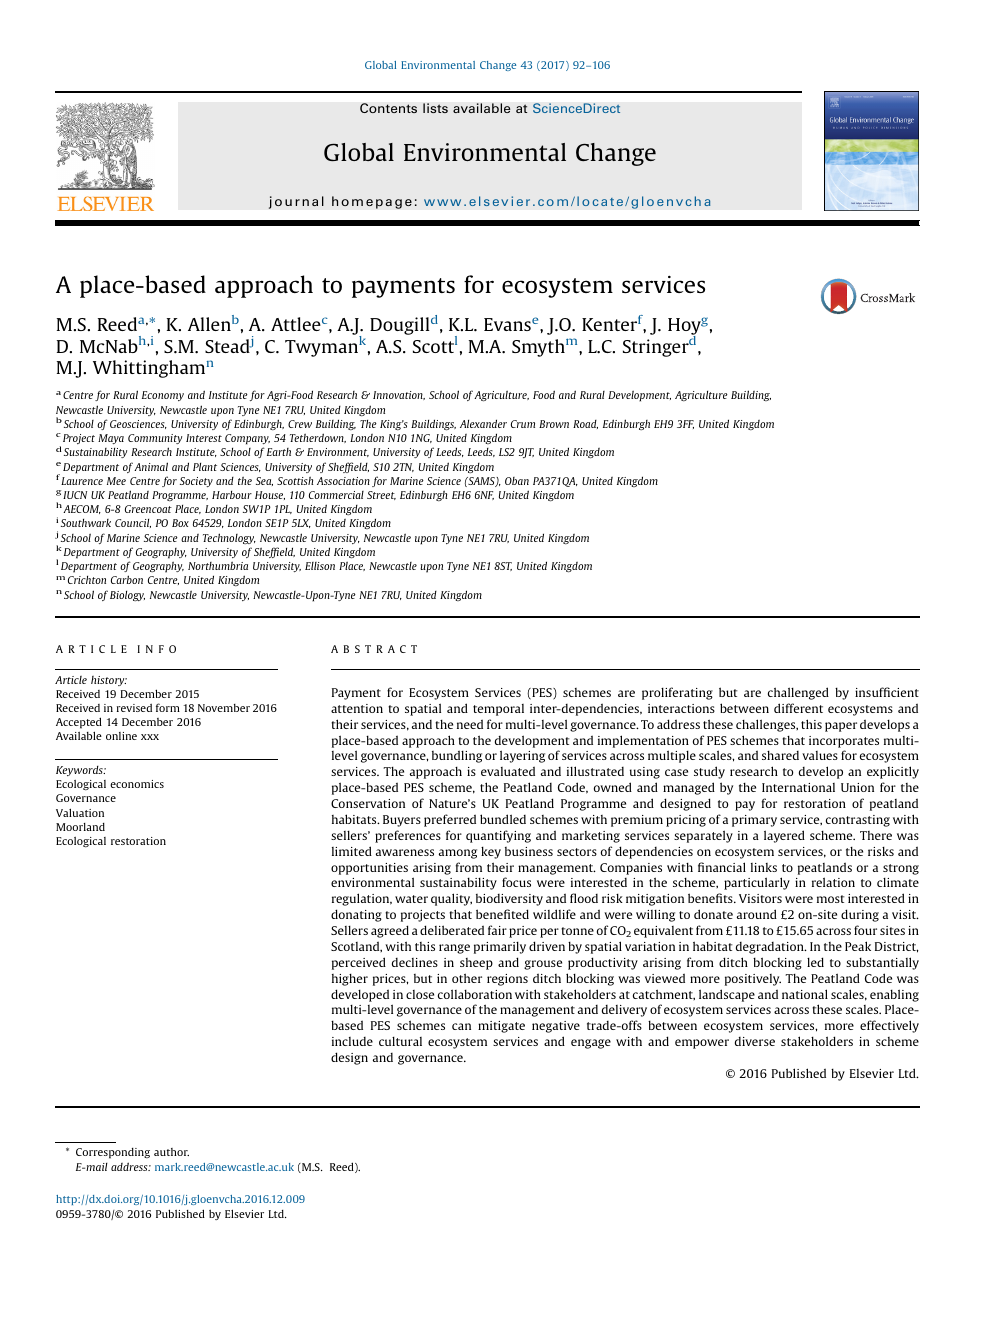 A place-based approach to payments for ecosystem services – topic of research paper in History and archaeology. Download scholarly article PDF and read for free on CyberLeninka science